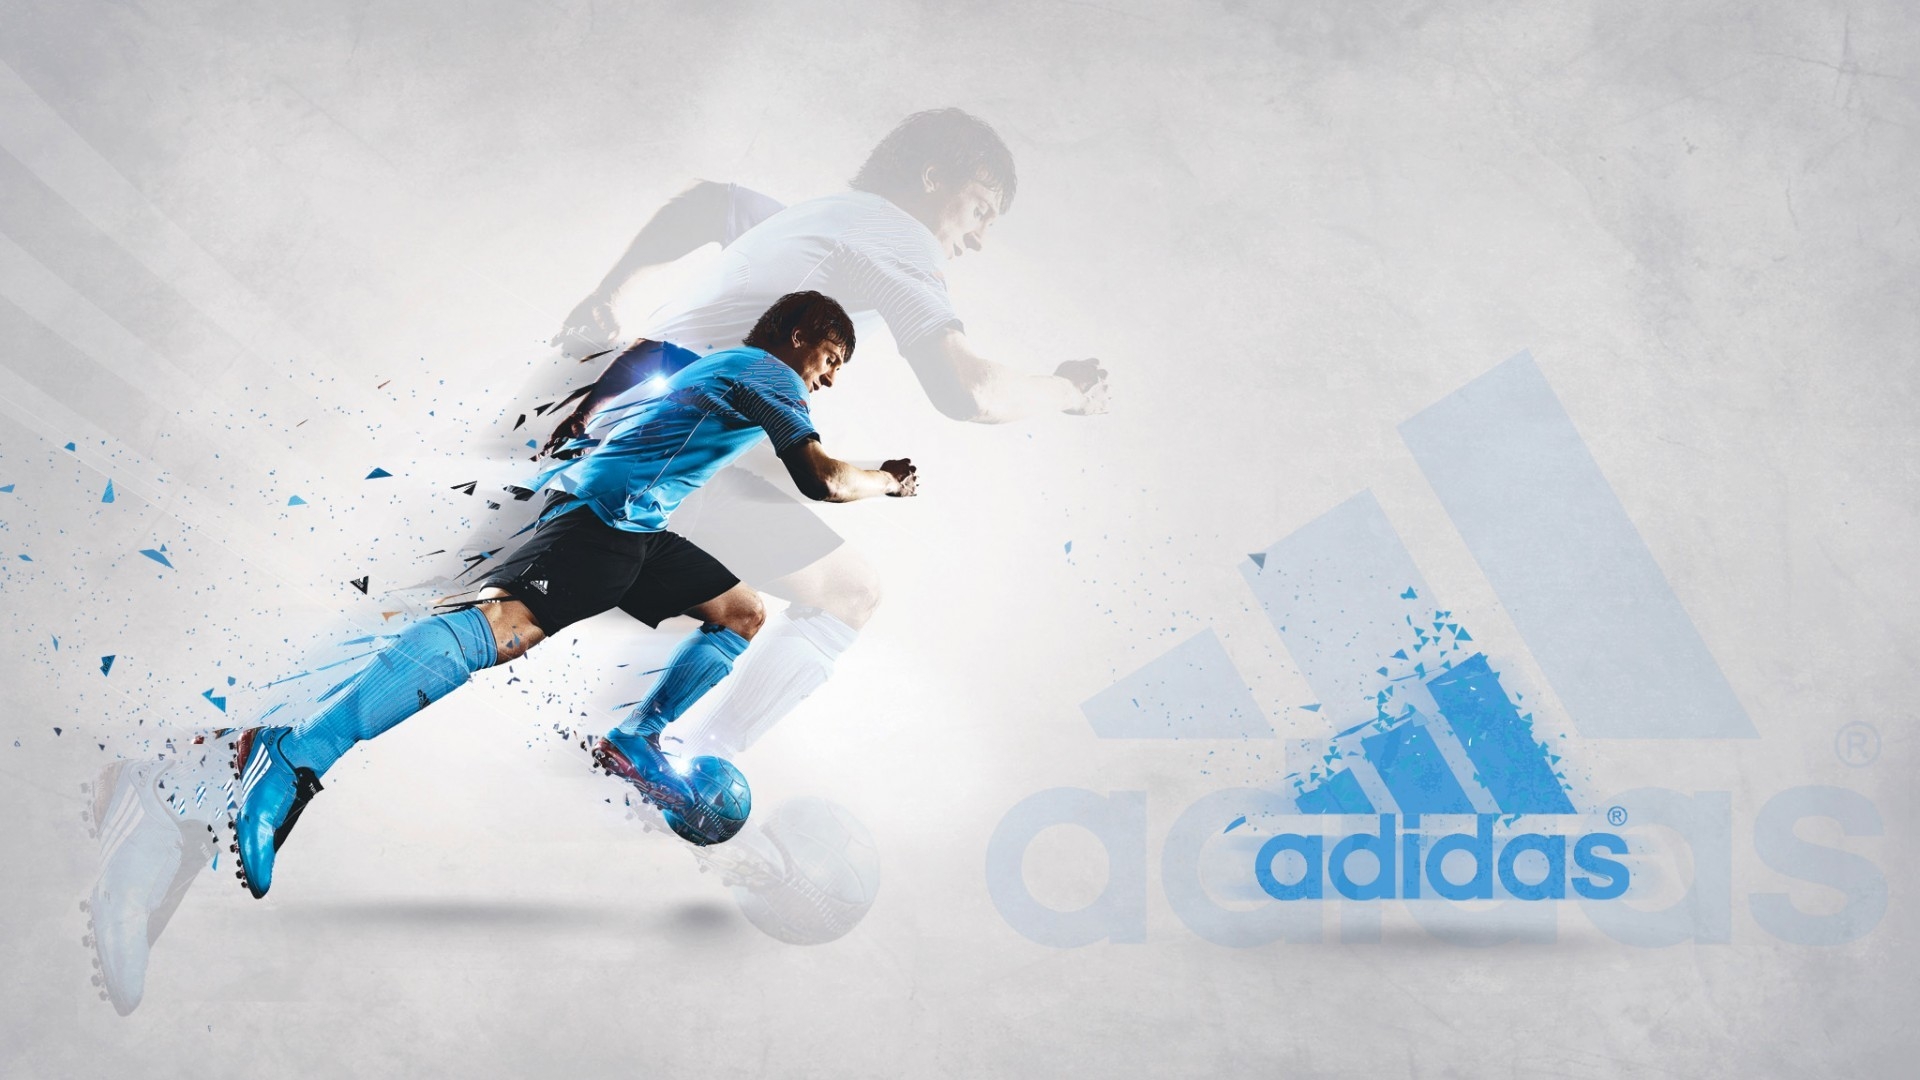 Adidas Poster for 1920 x 1080 HDTV 1080p resolution